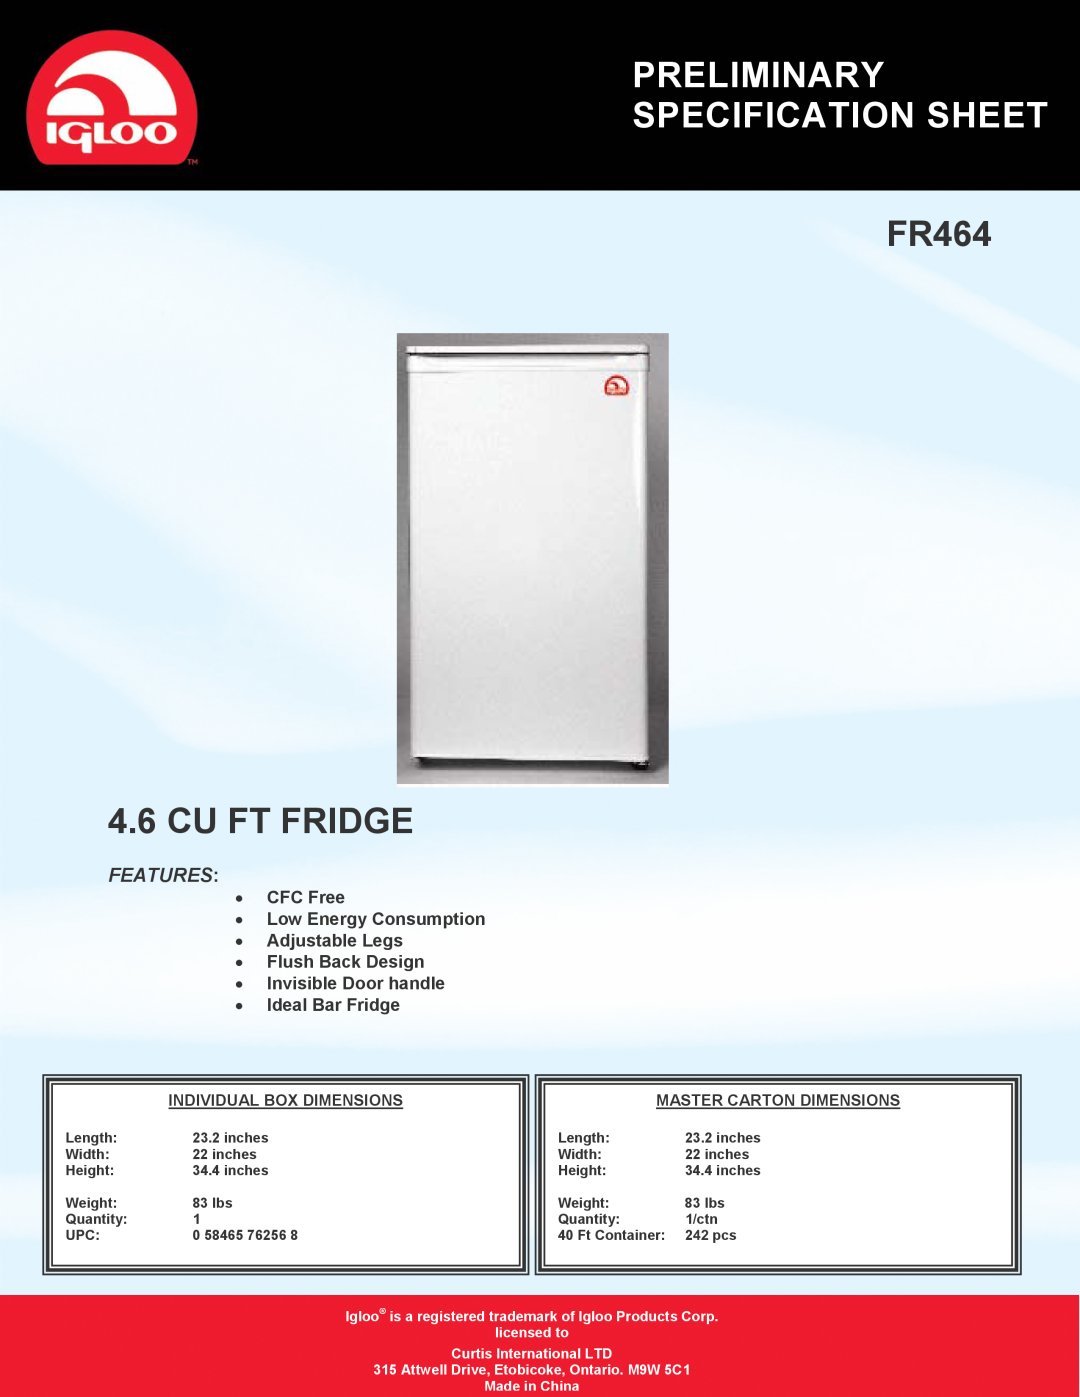 Curtis specifications Preliminary Specification Sheet, FR464 4.6 CU FT FRIDGE, Features, Individual Box Dimensions 